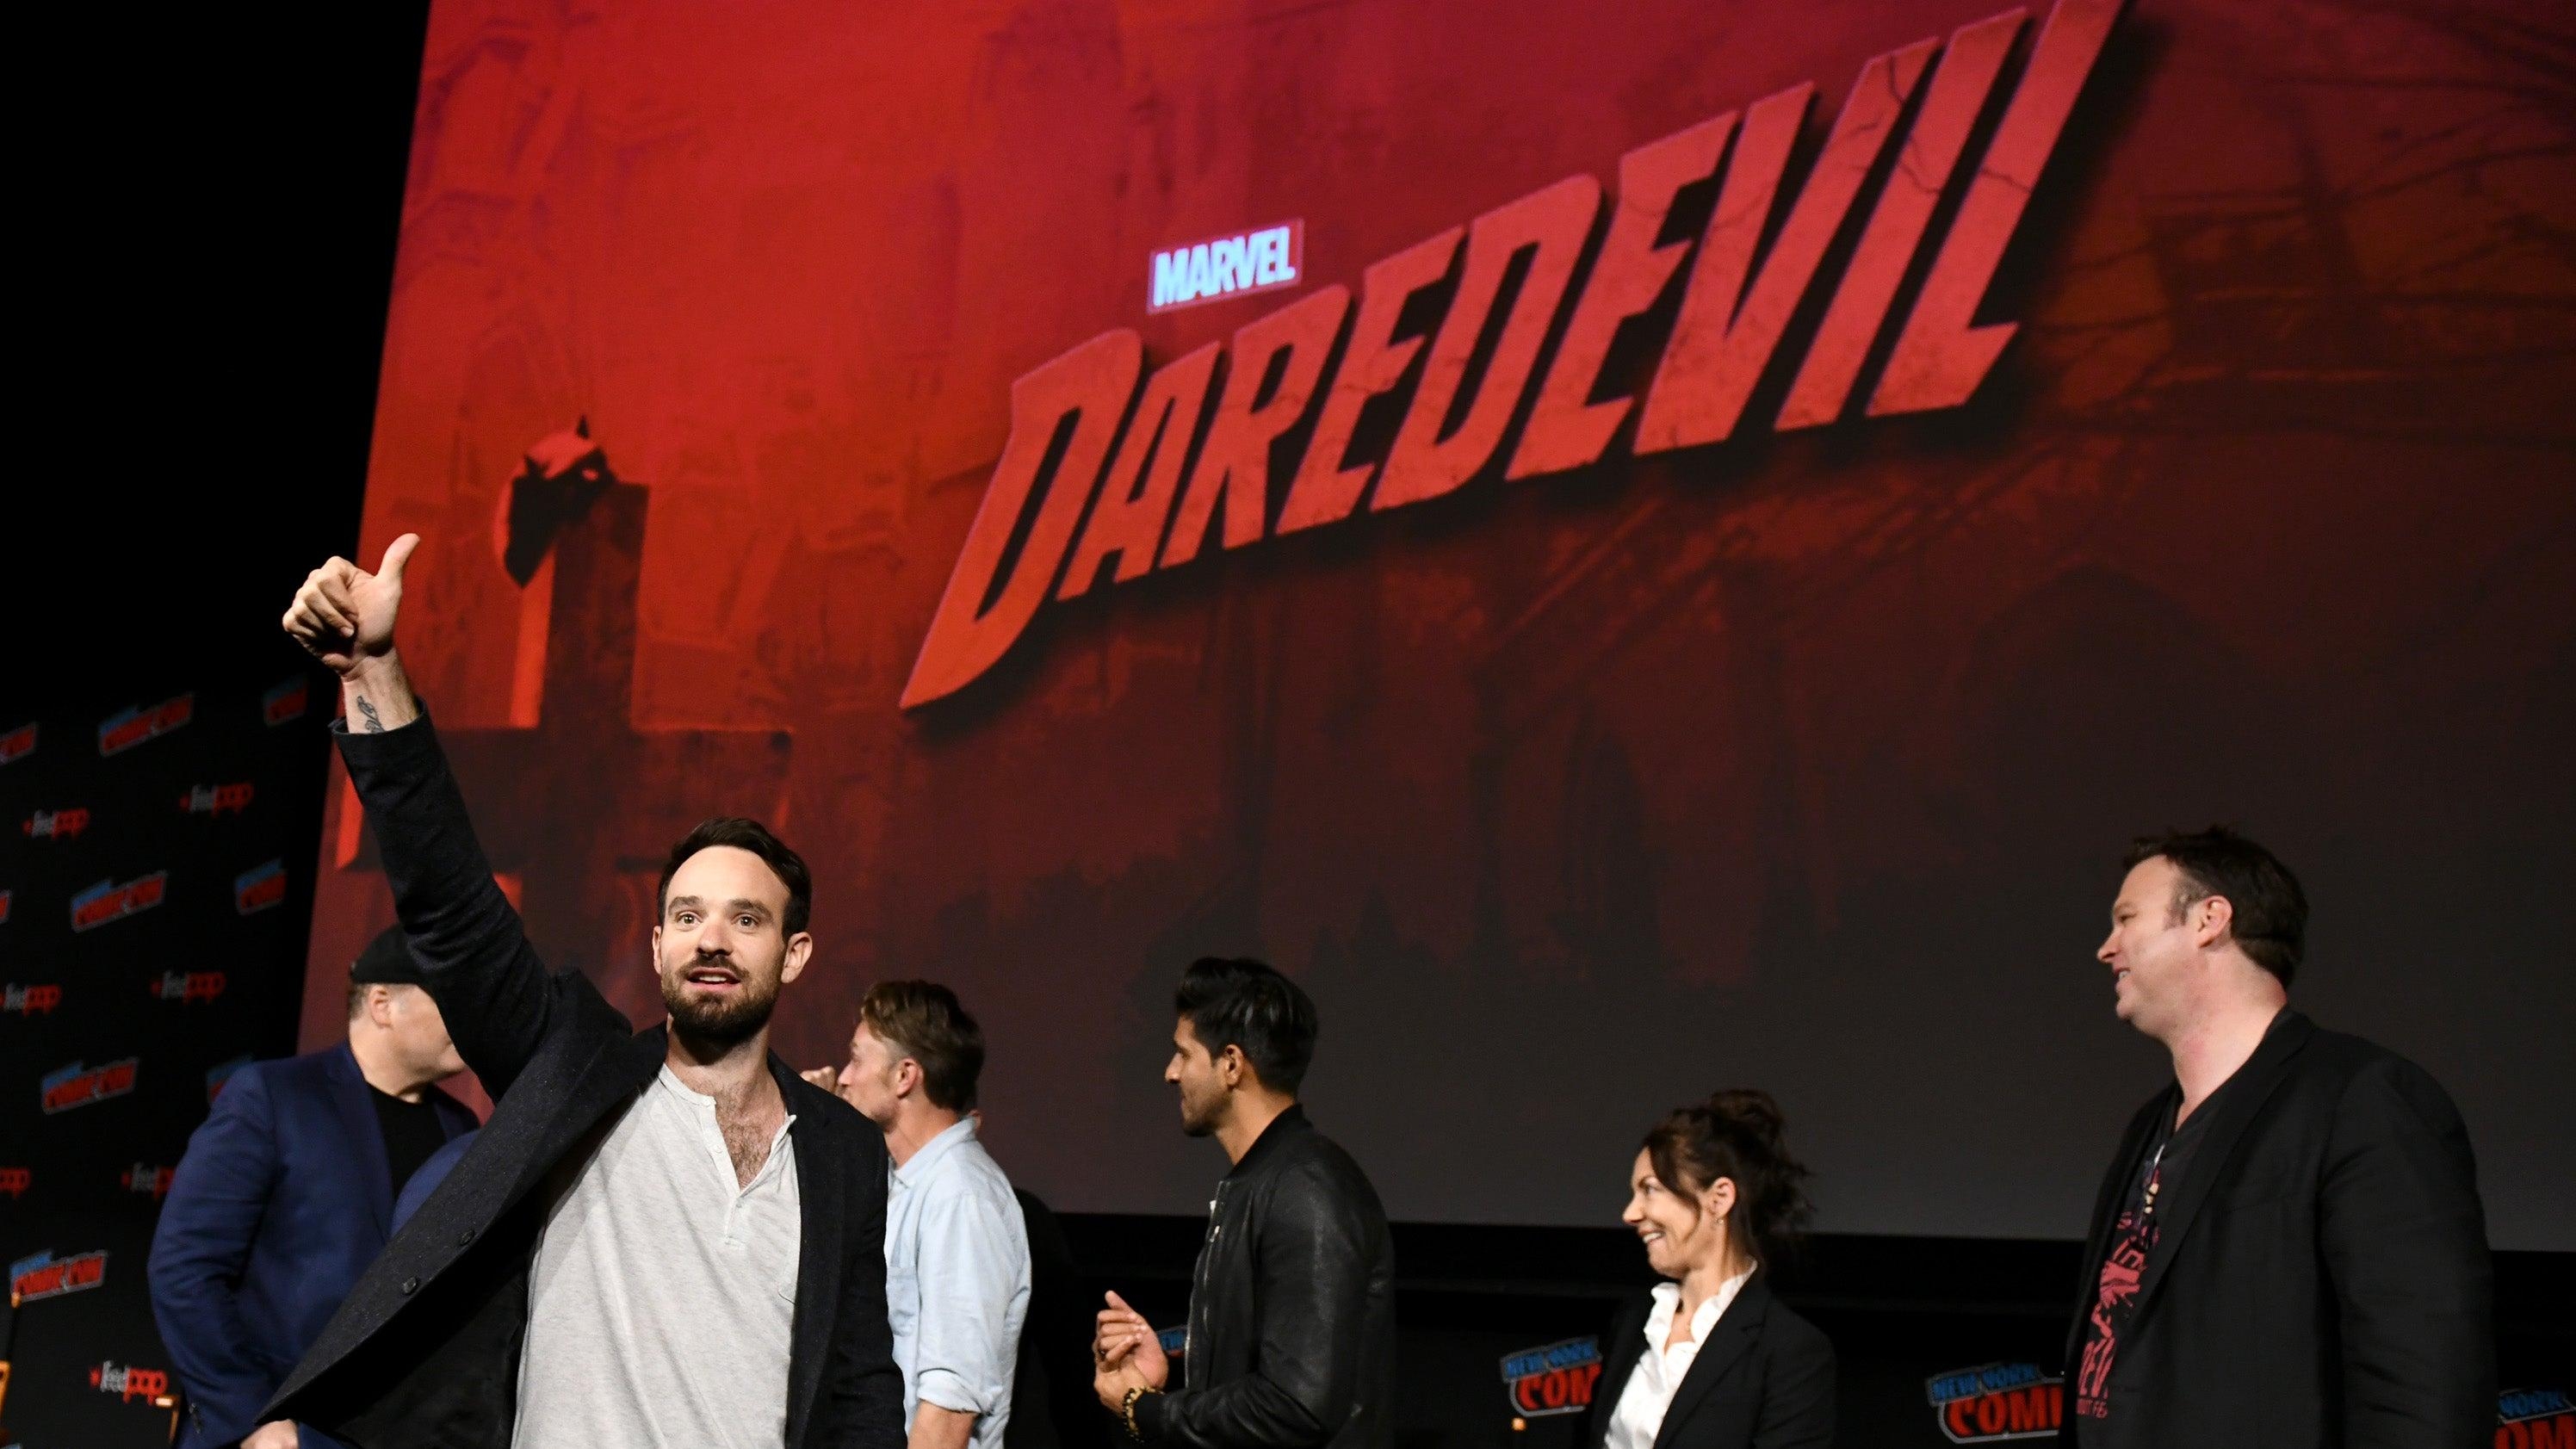 Kevin Feige confirms Charlie Cox will be the MCU’s Daredevil after all